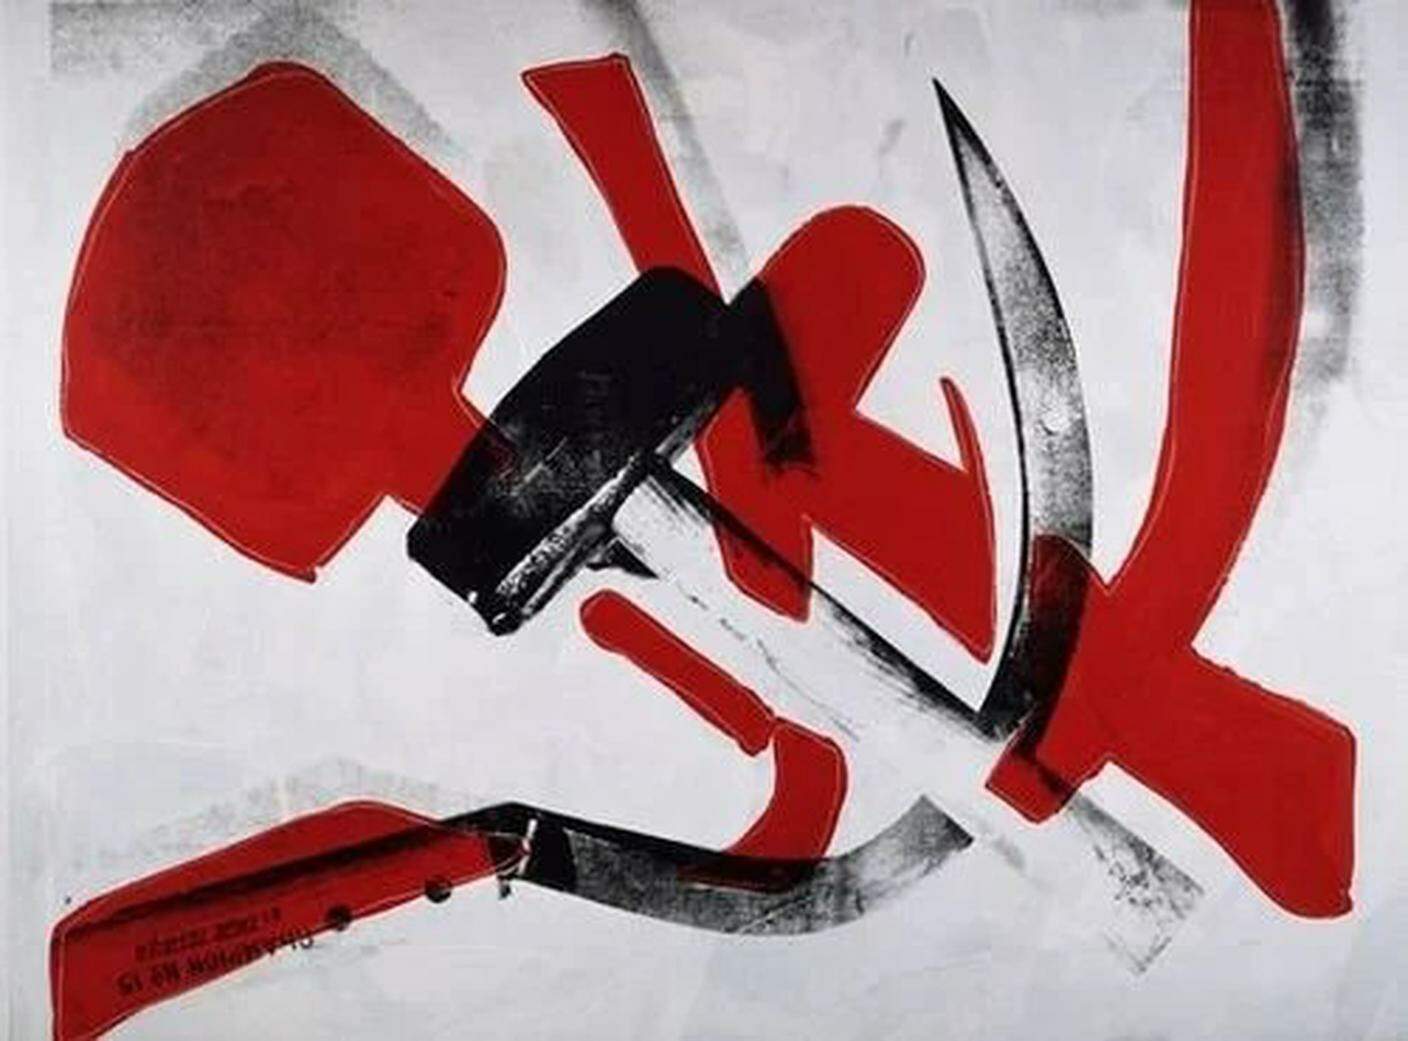 Andy Wahrol, Hammer and Sickle